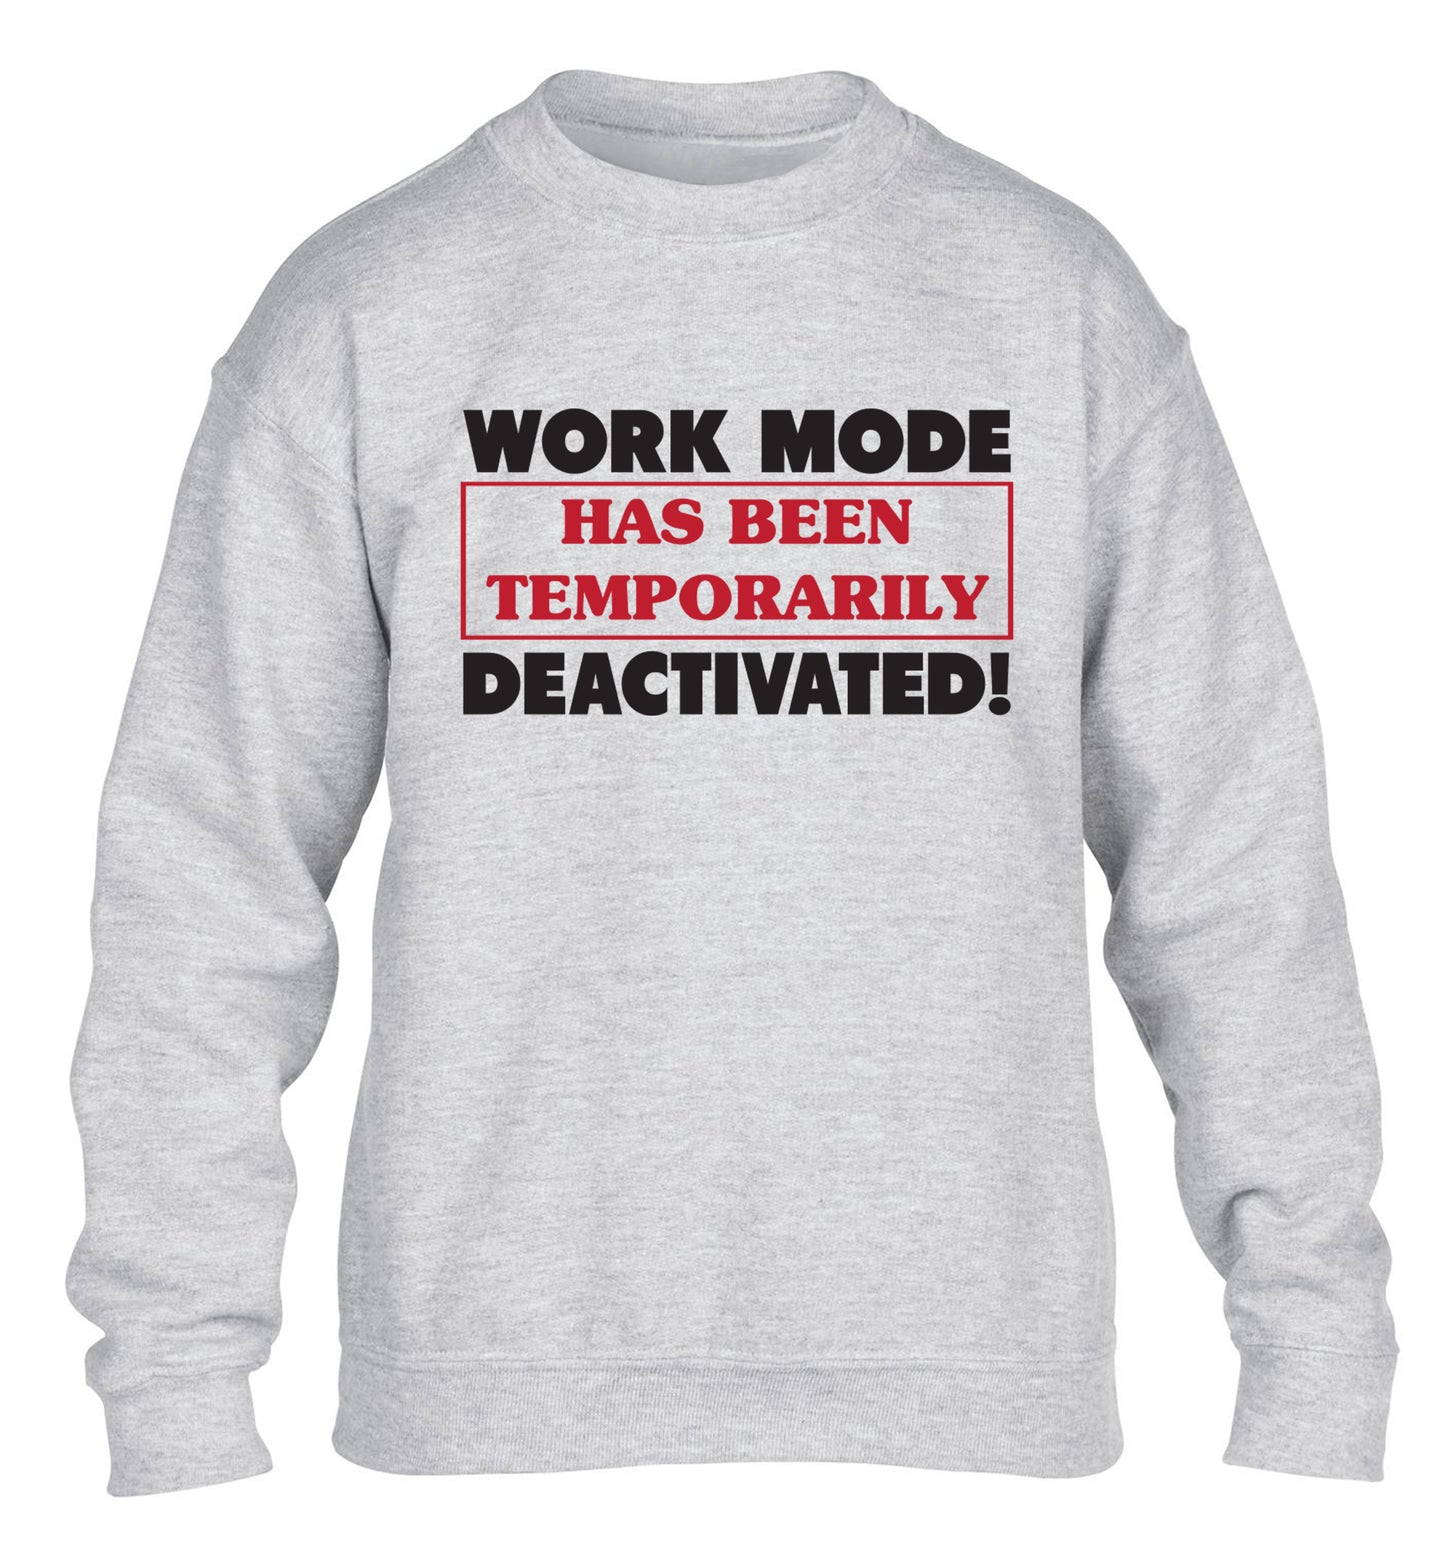 Work mode has now been temporarily deactivated children's grey sweater 12-13 Years